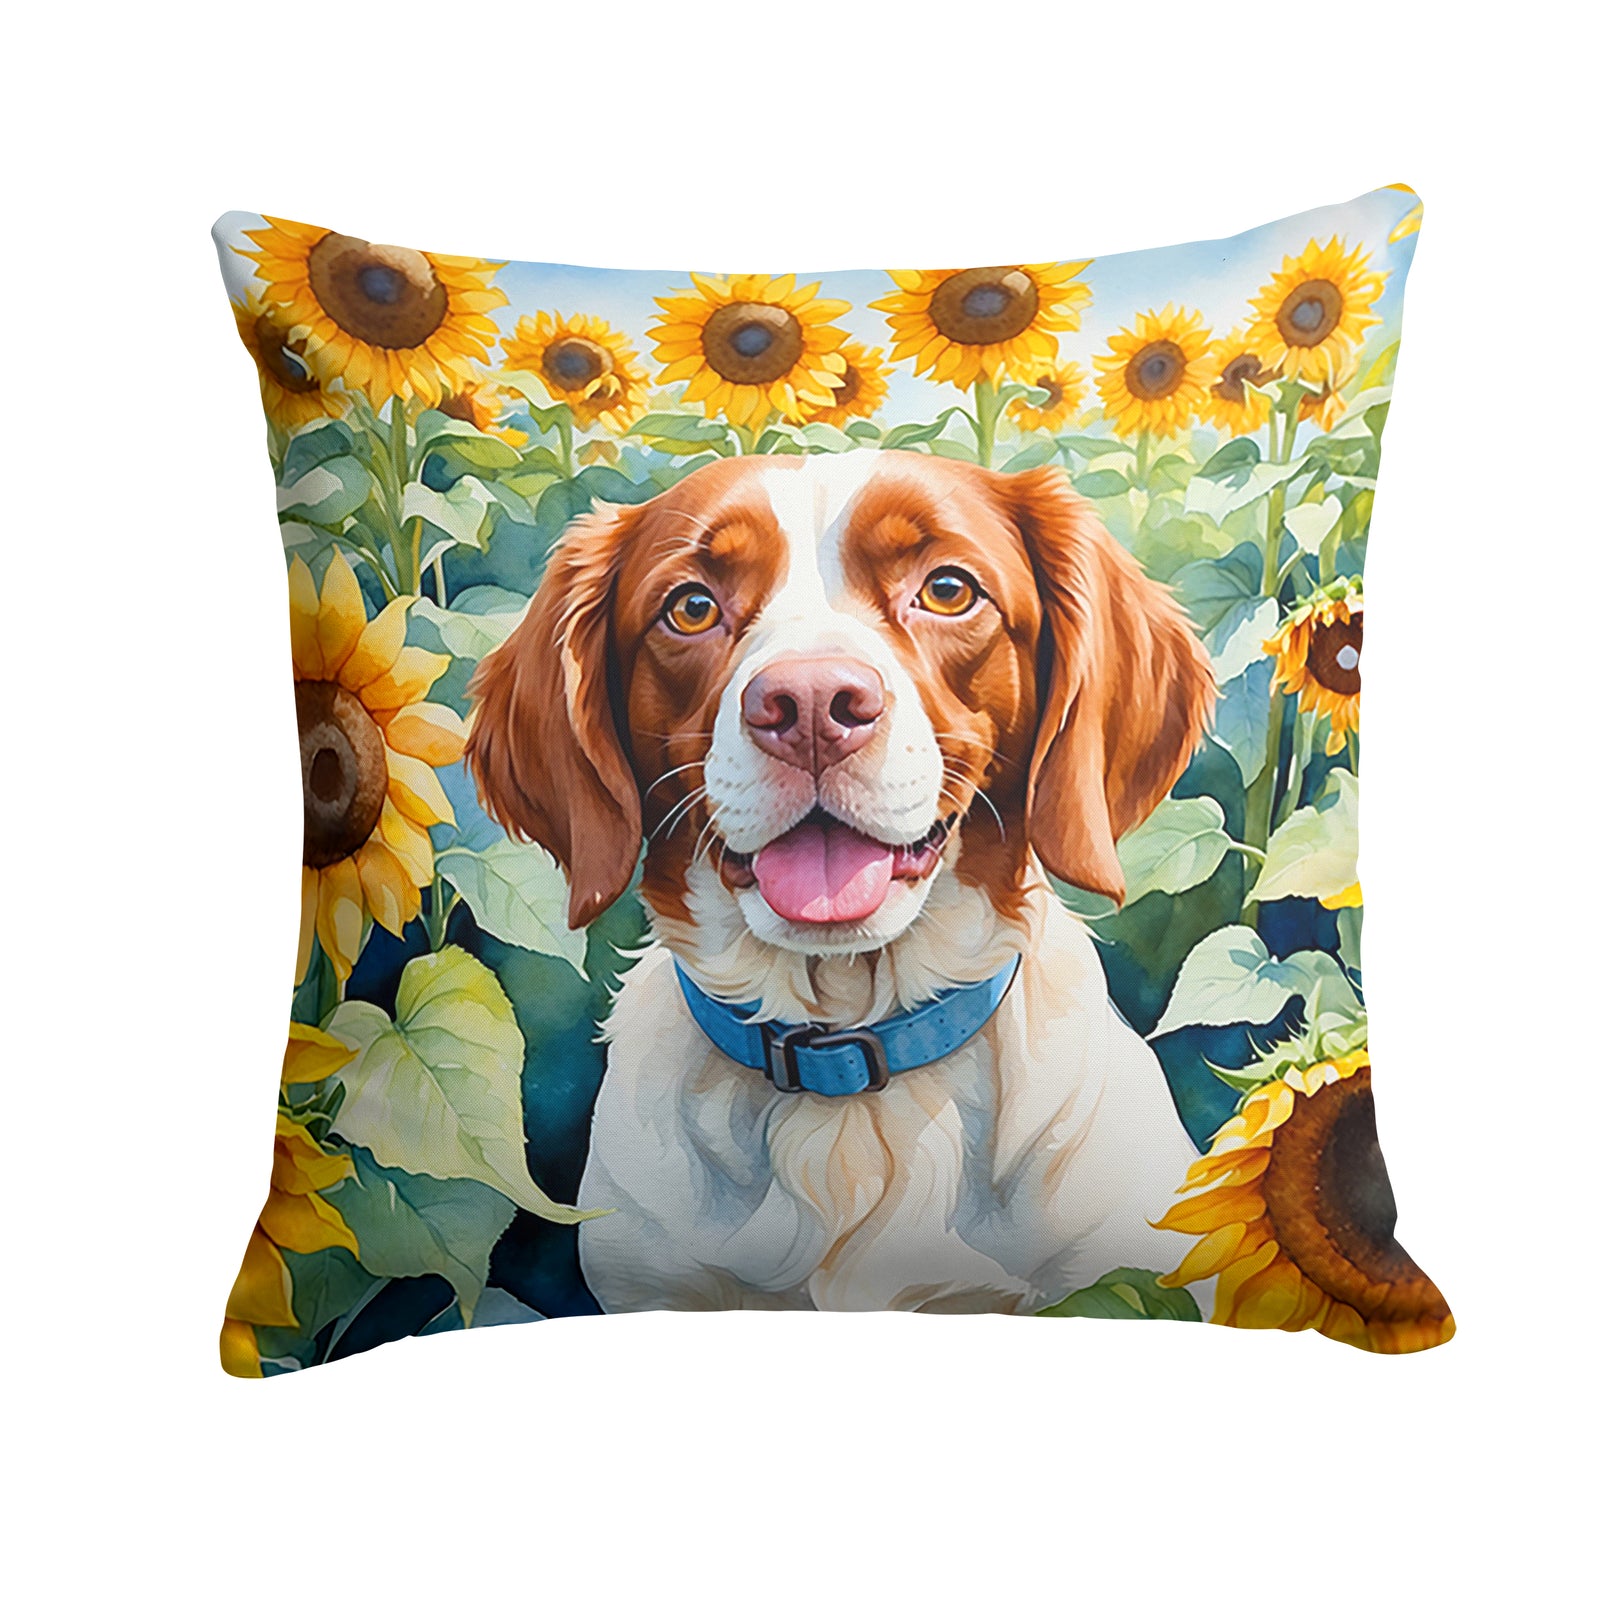 Buy this Brittany Spaniel in Sunflowers Throw Pillow